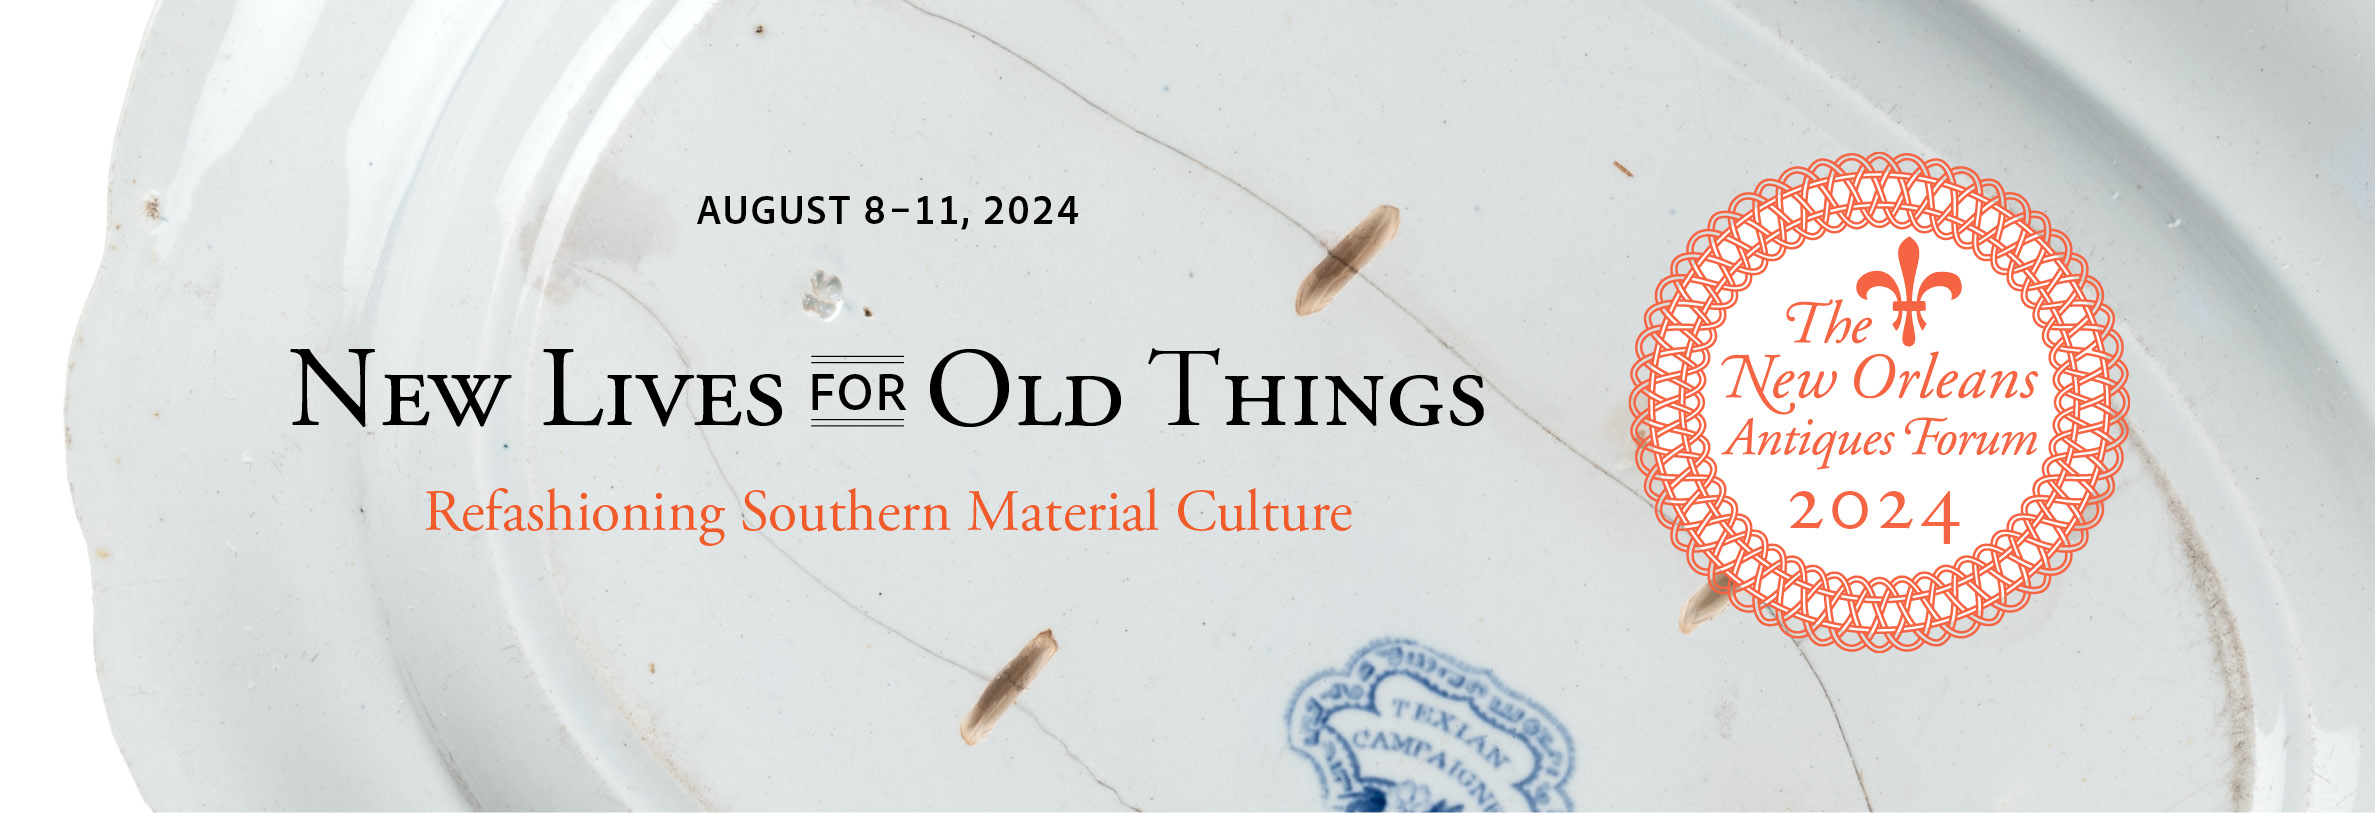 New Lives for Old Things: Refashioning Southern Material Culture, August 8-11, 2024